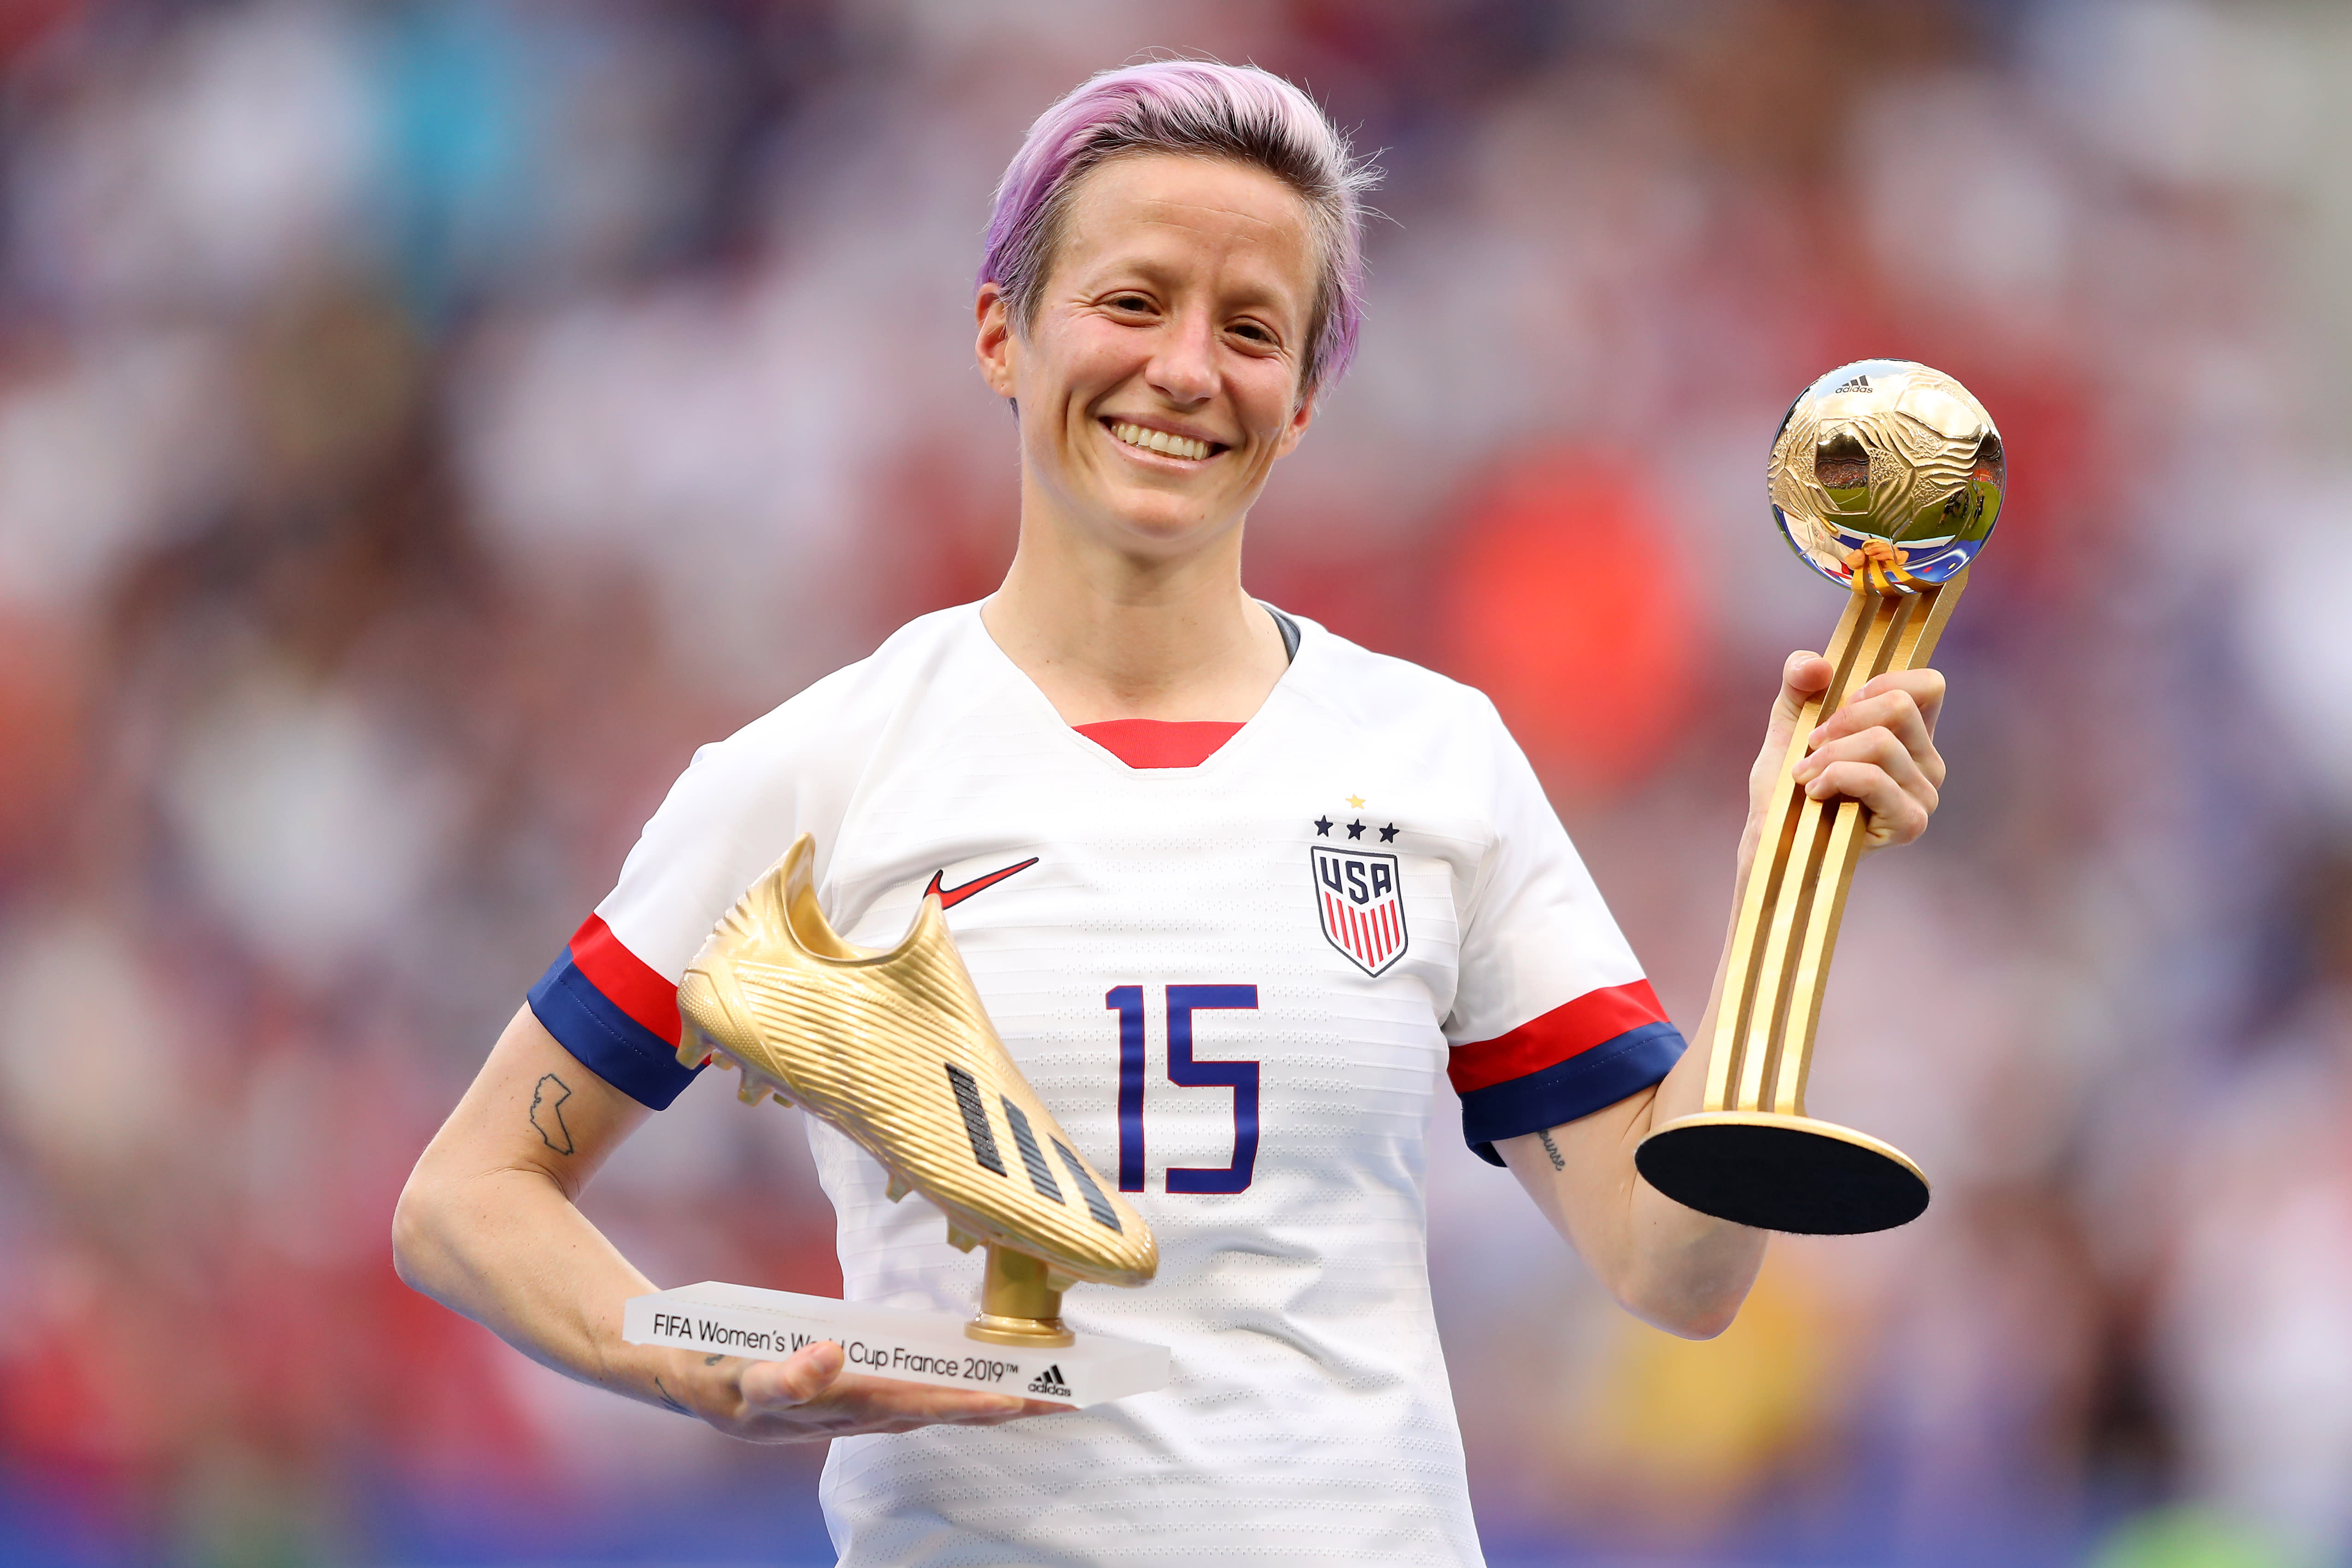 Megan Rapinoe "We don't know how to quit"